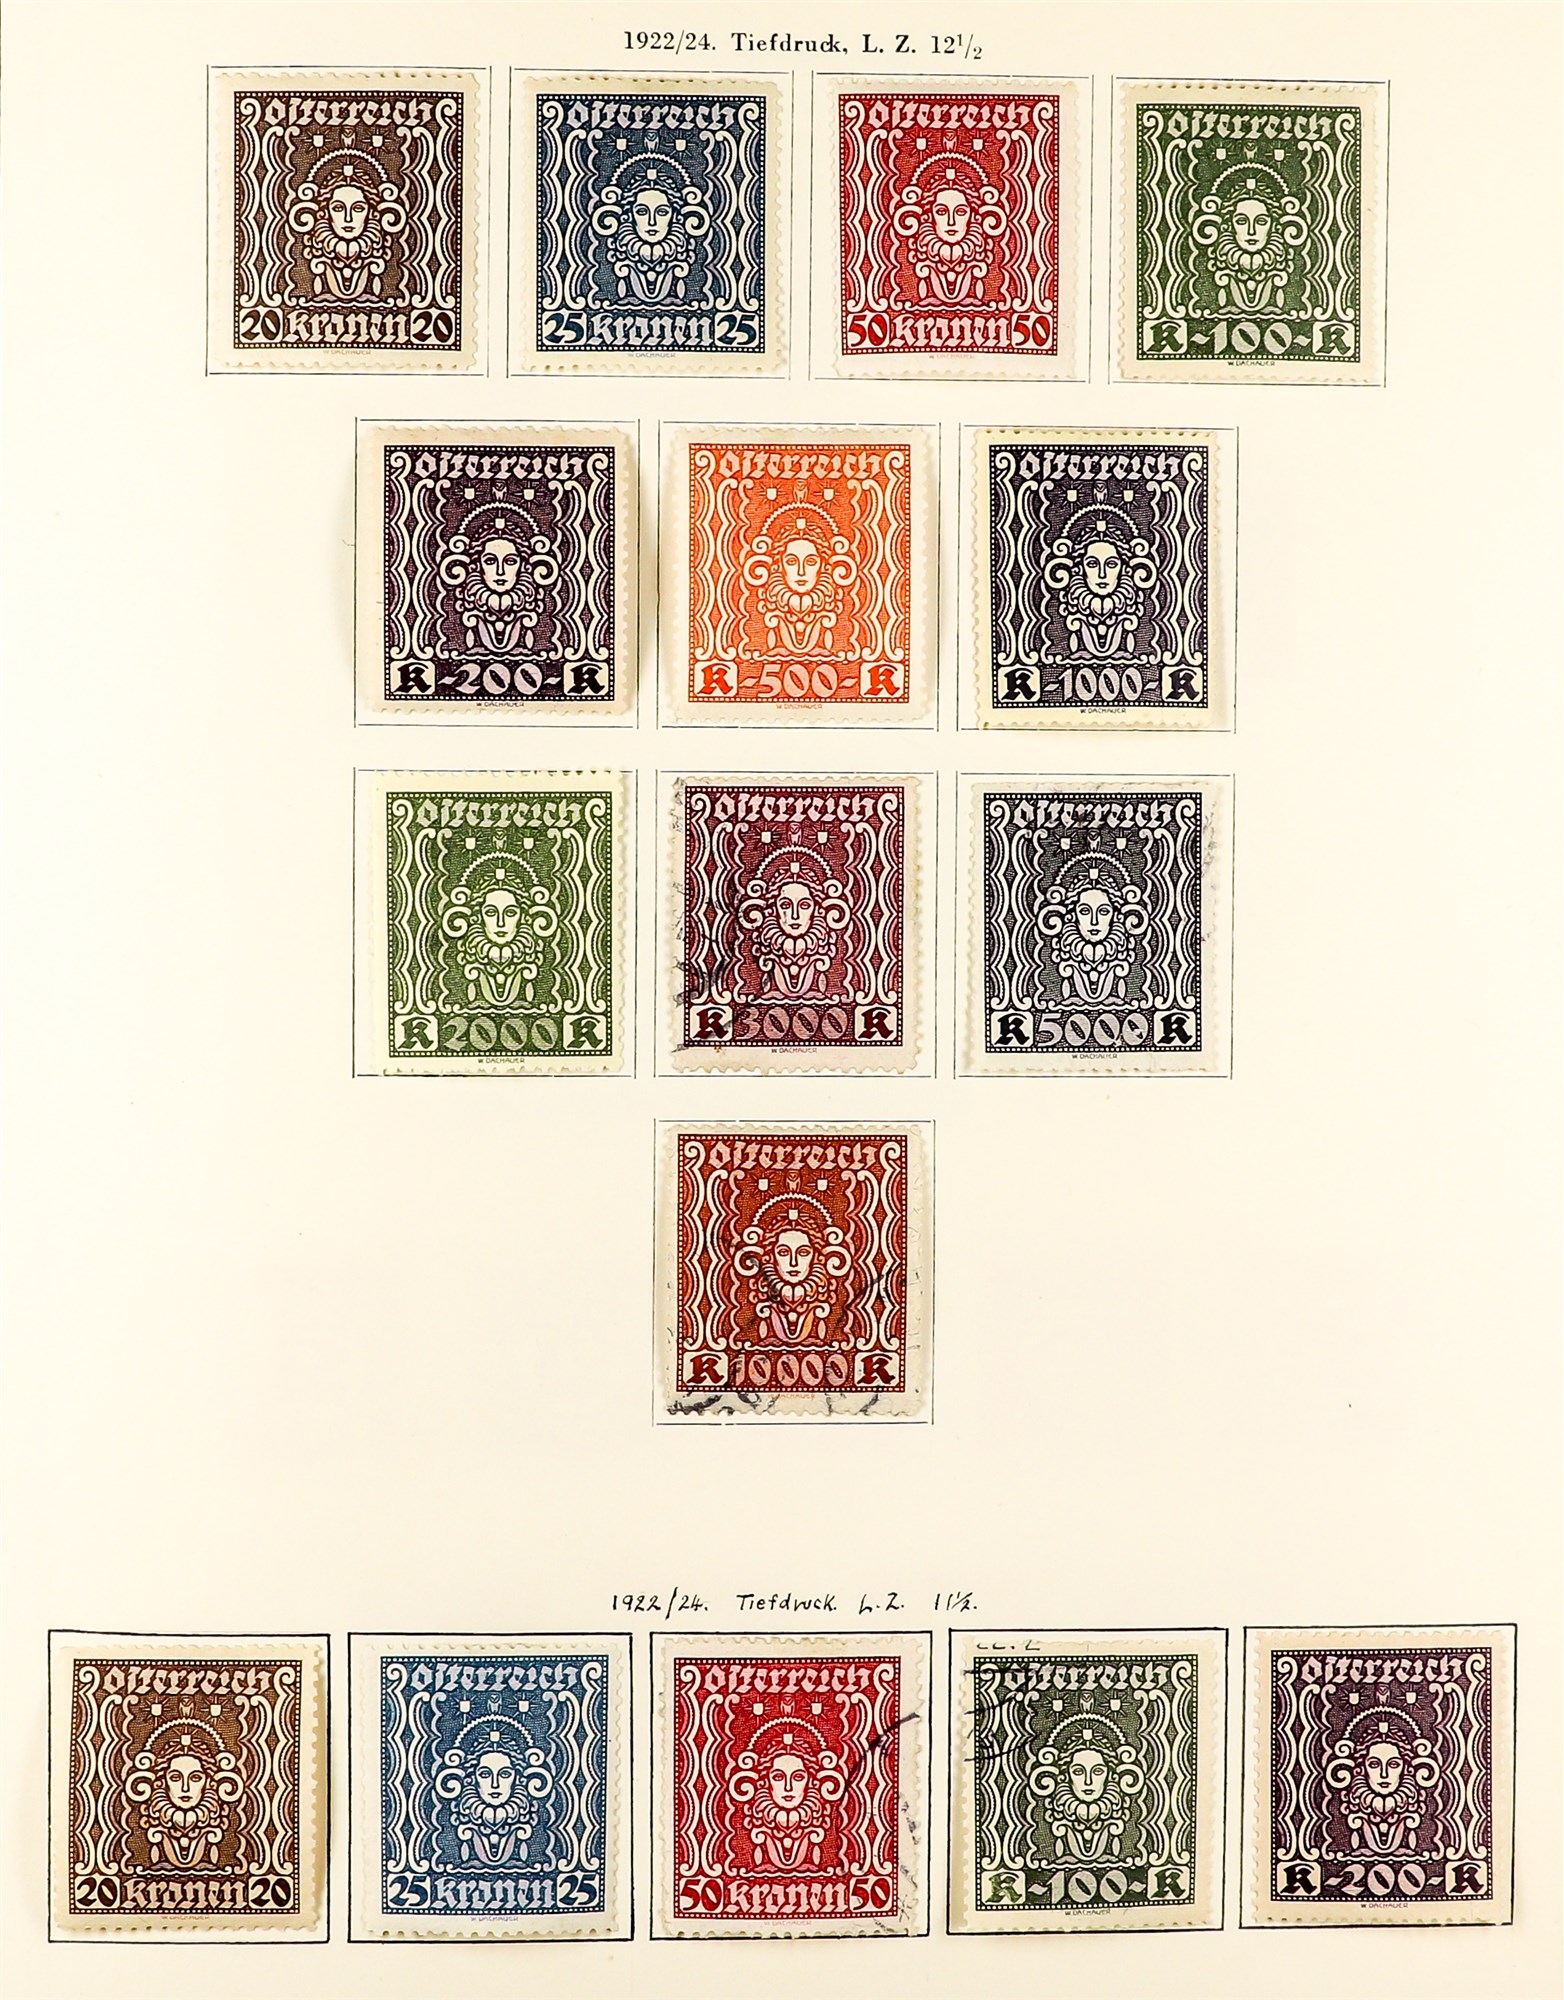 AUSTRIA 1918 - 1937 REPUBLIC COLLECTION of chiefly mint / never hinged mint sets in album incl - Image 8 of 22